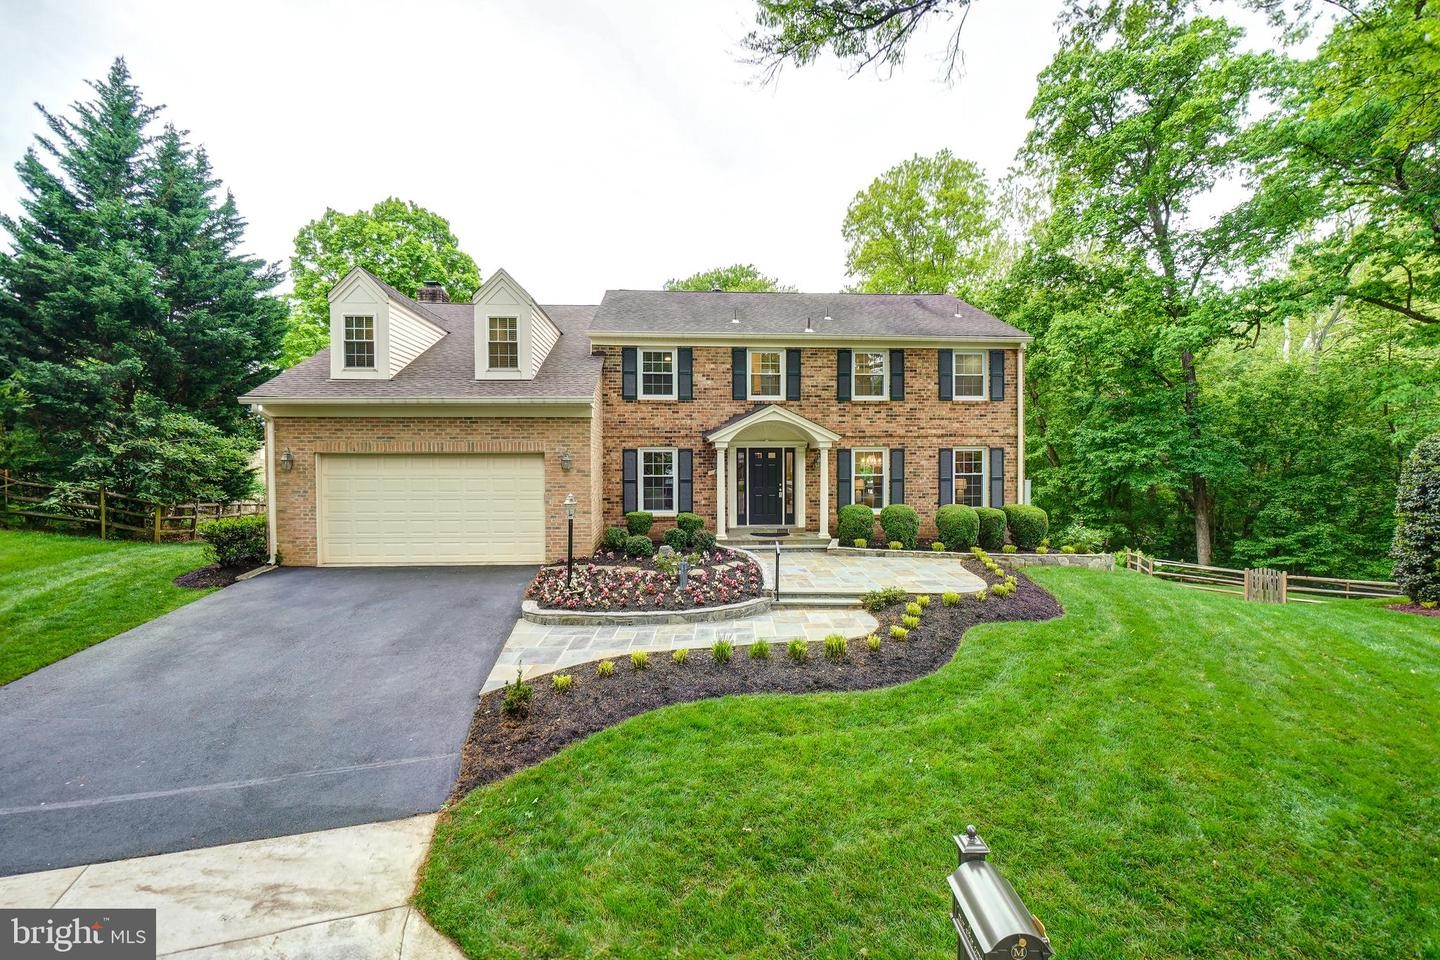 27. 8 Trail House Ct